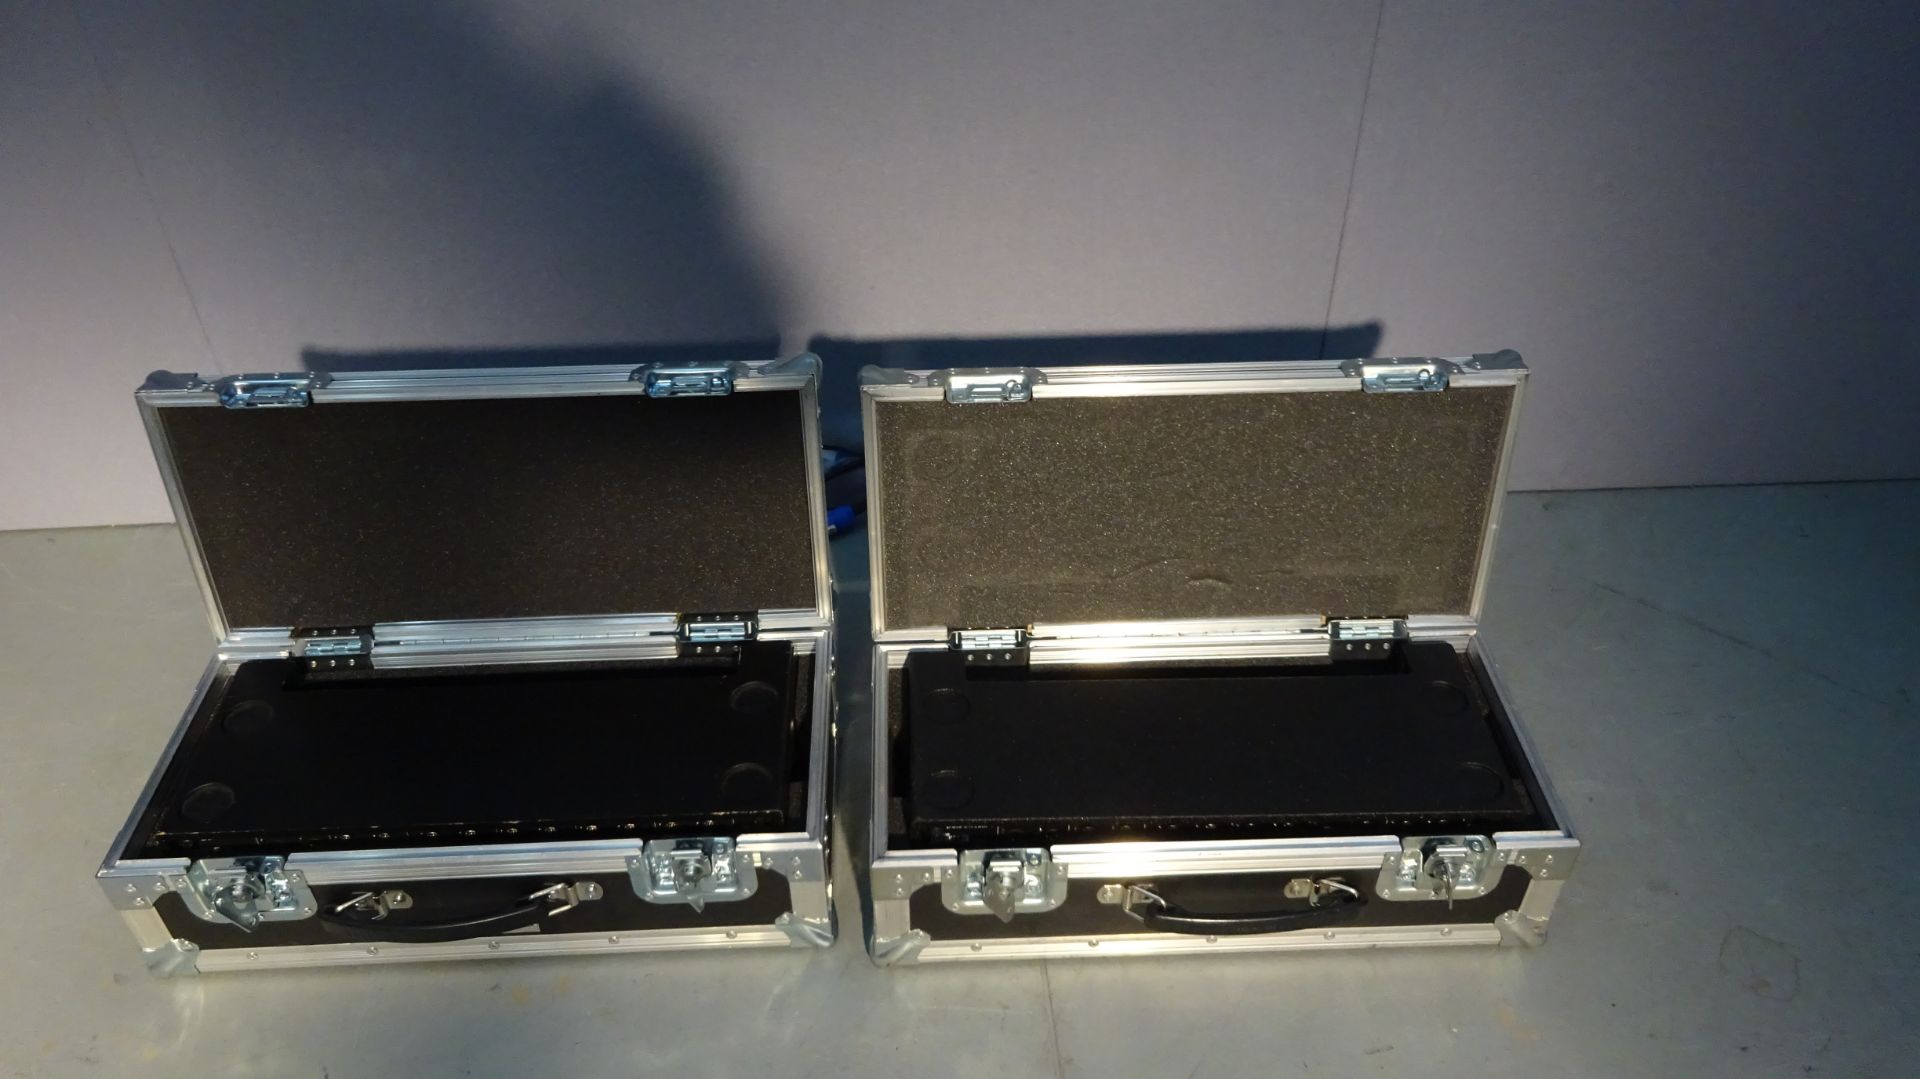 2 x Chauvet DMX Buffer Data Stream 4 1 in 4 out 3pin or 5pin c/w mains lead & Flight Case - Image 7 of 8